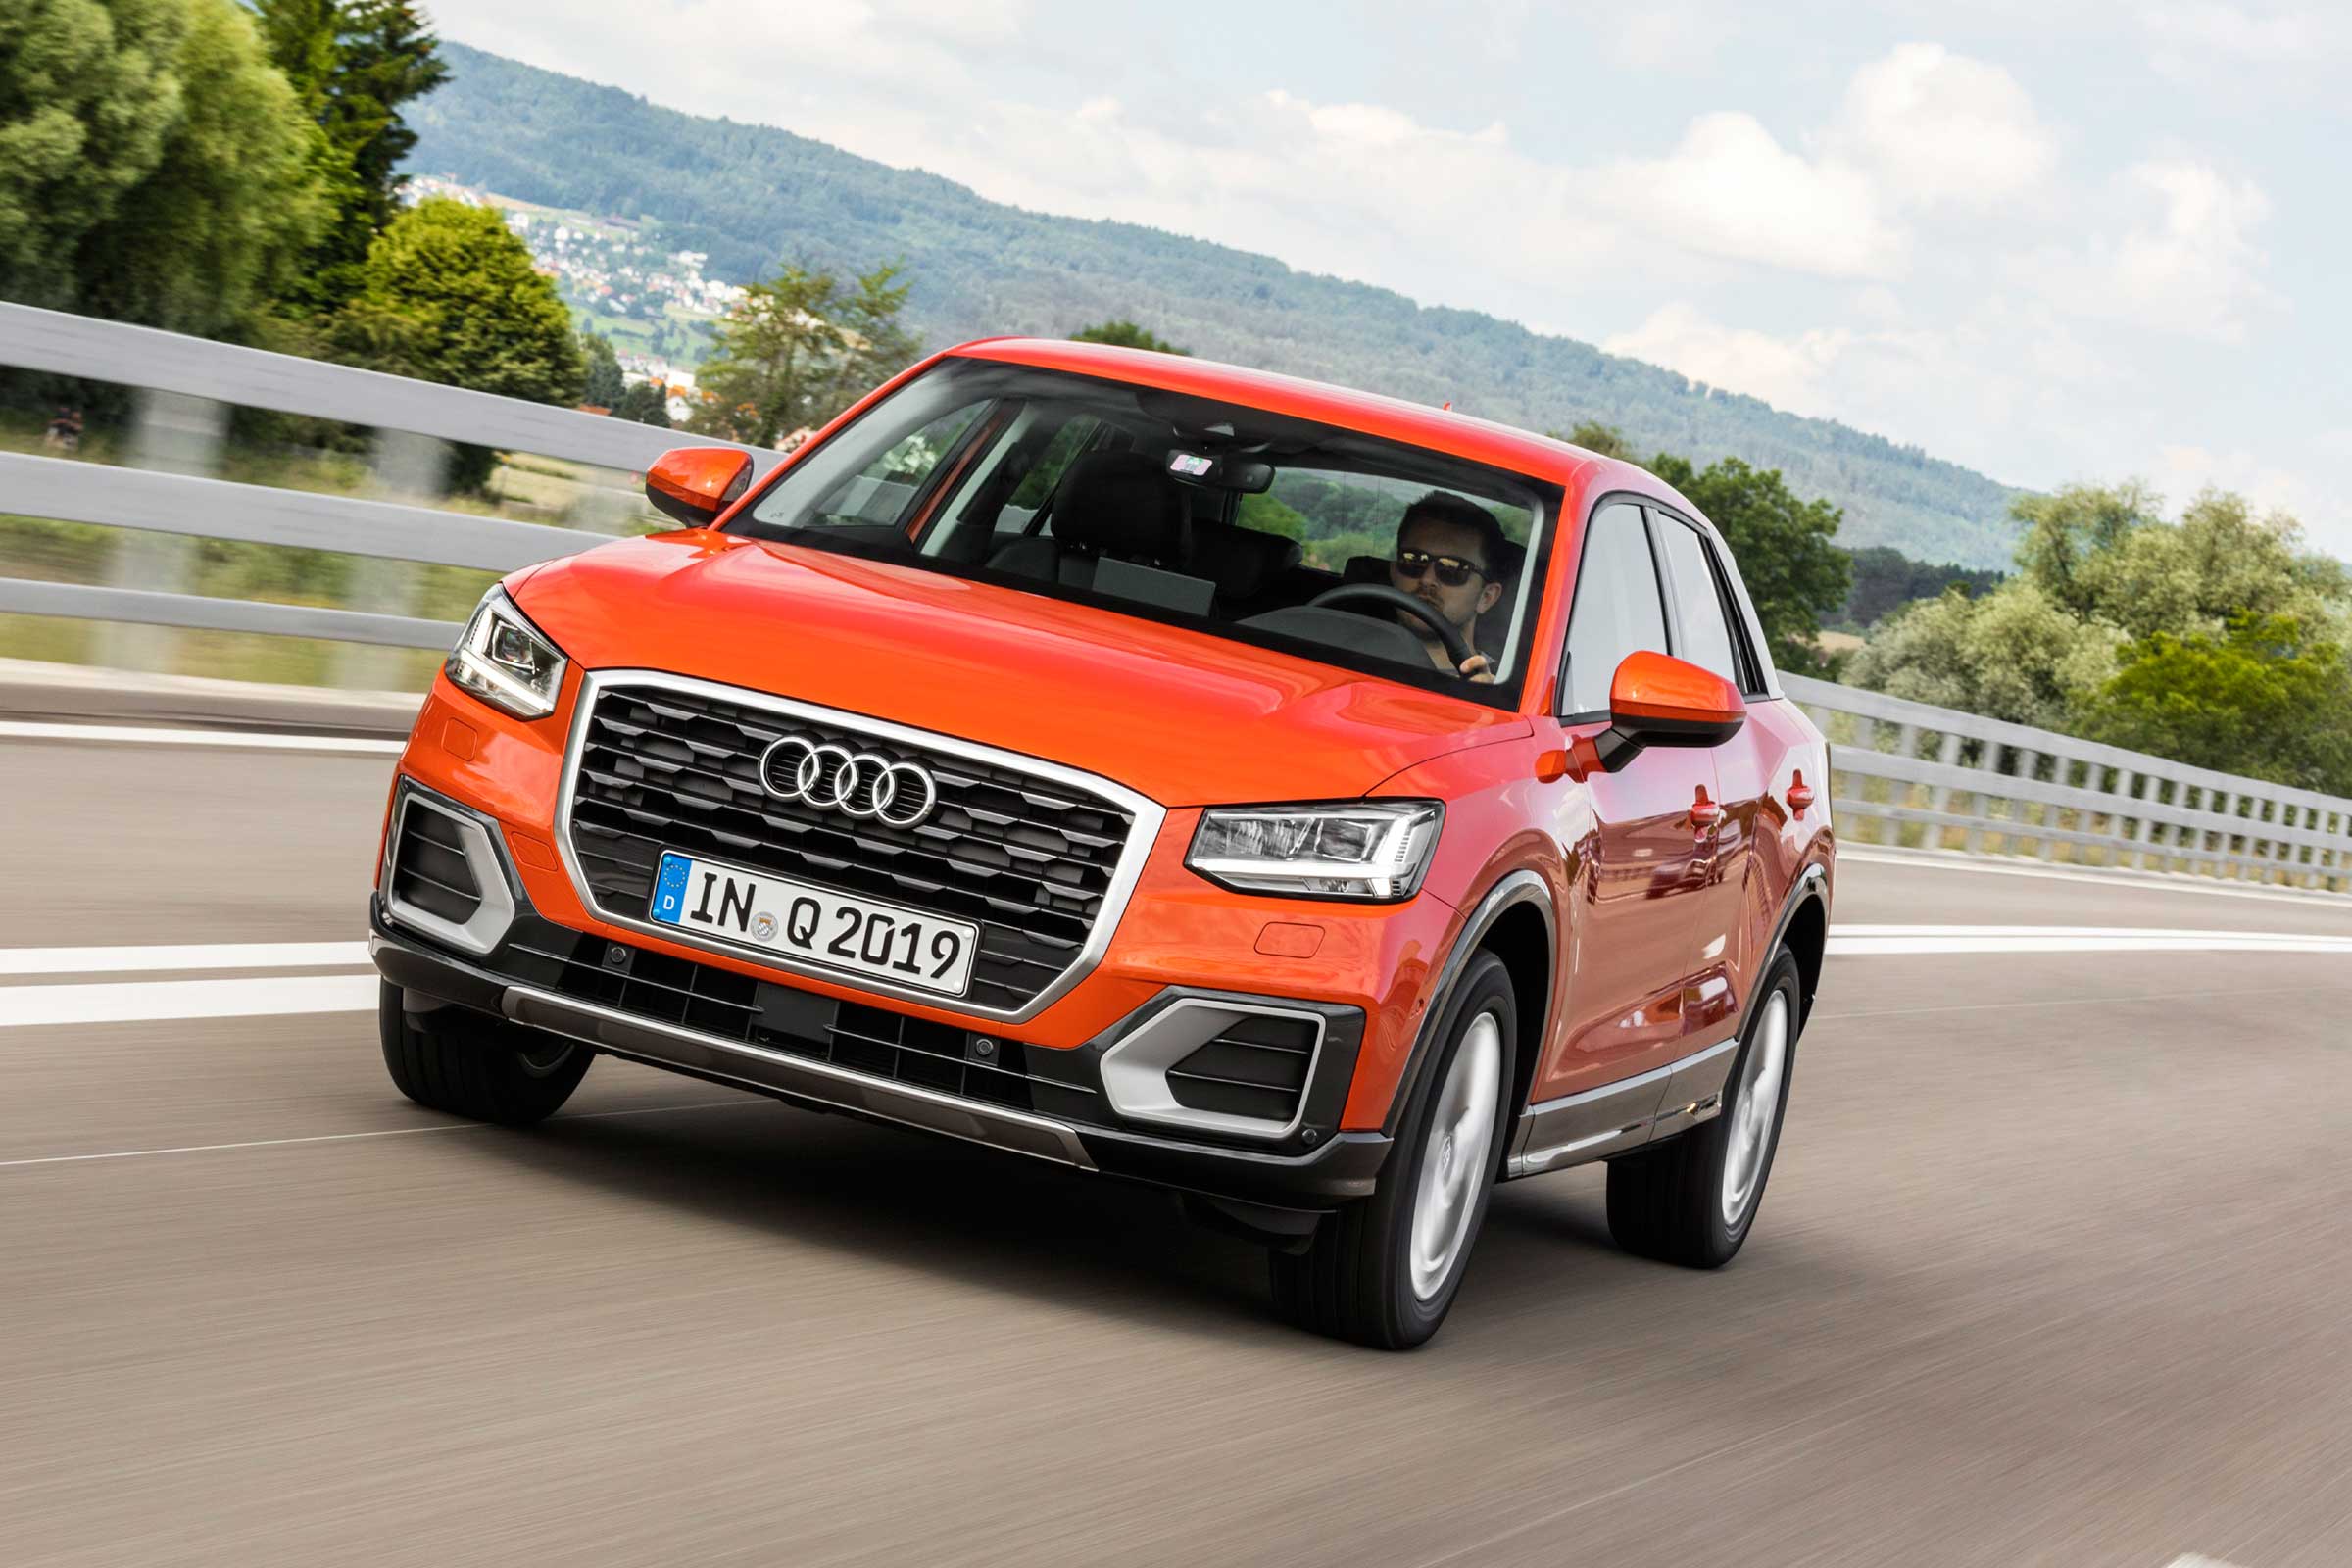 New Audi Q2 SUV full prices, specs and release date Carbuyer